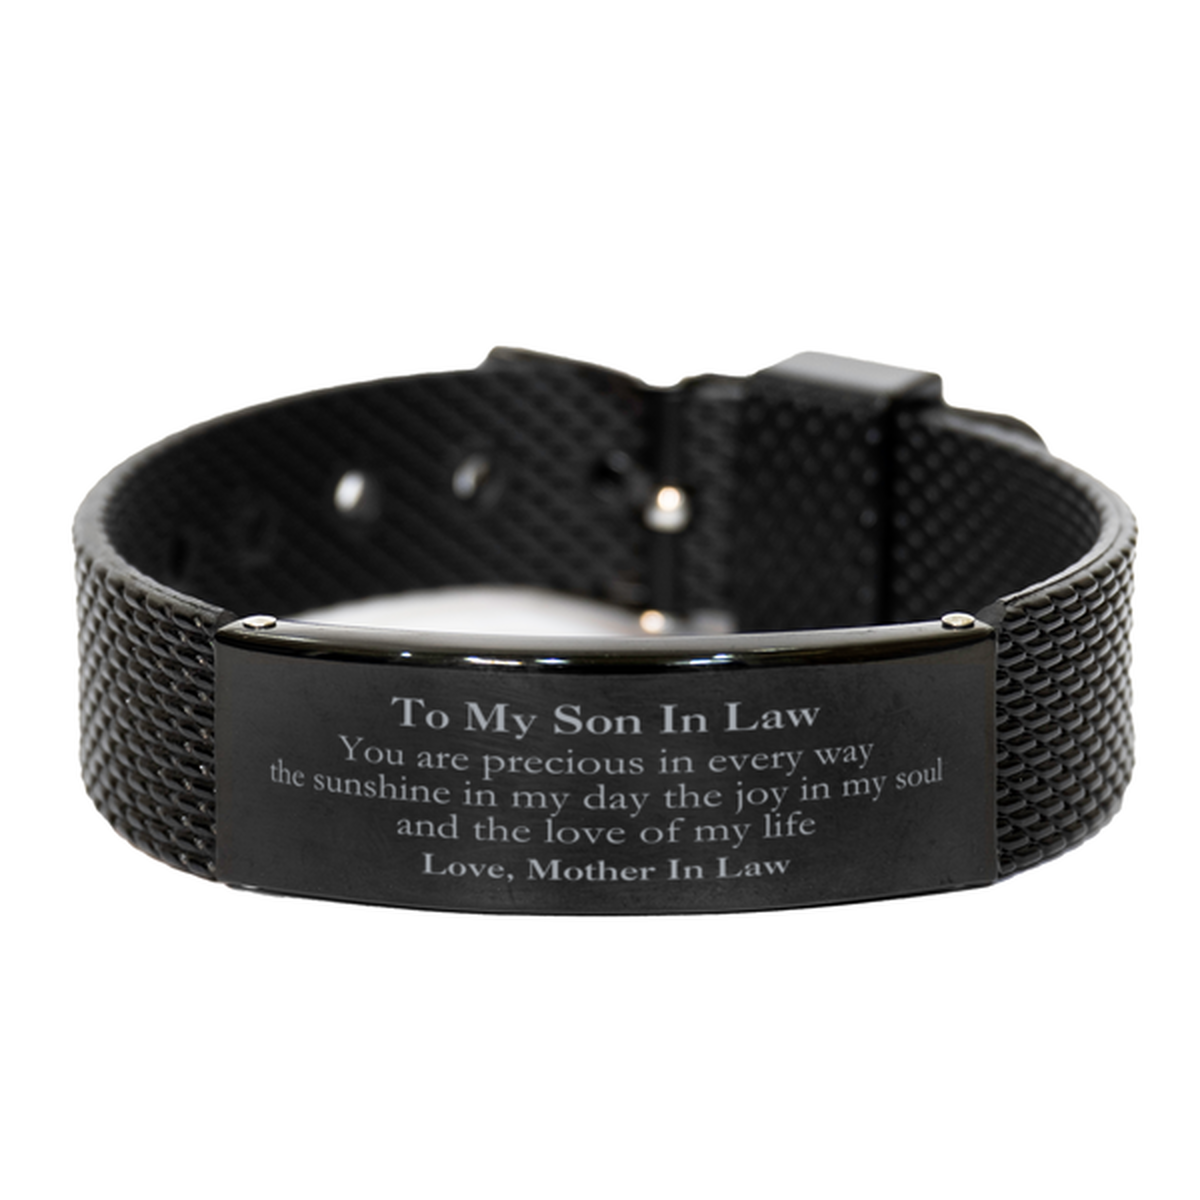 Graduation Gifts for Son In Law Black Shark Mesh Bracelet Present from Mother In Law, Christmas Son In Law Birthday Gifts Son In Law You are precious in every way the sunshine in my day. Love, Mother In Law